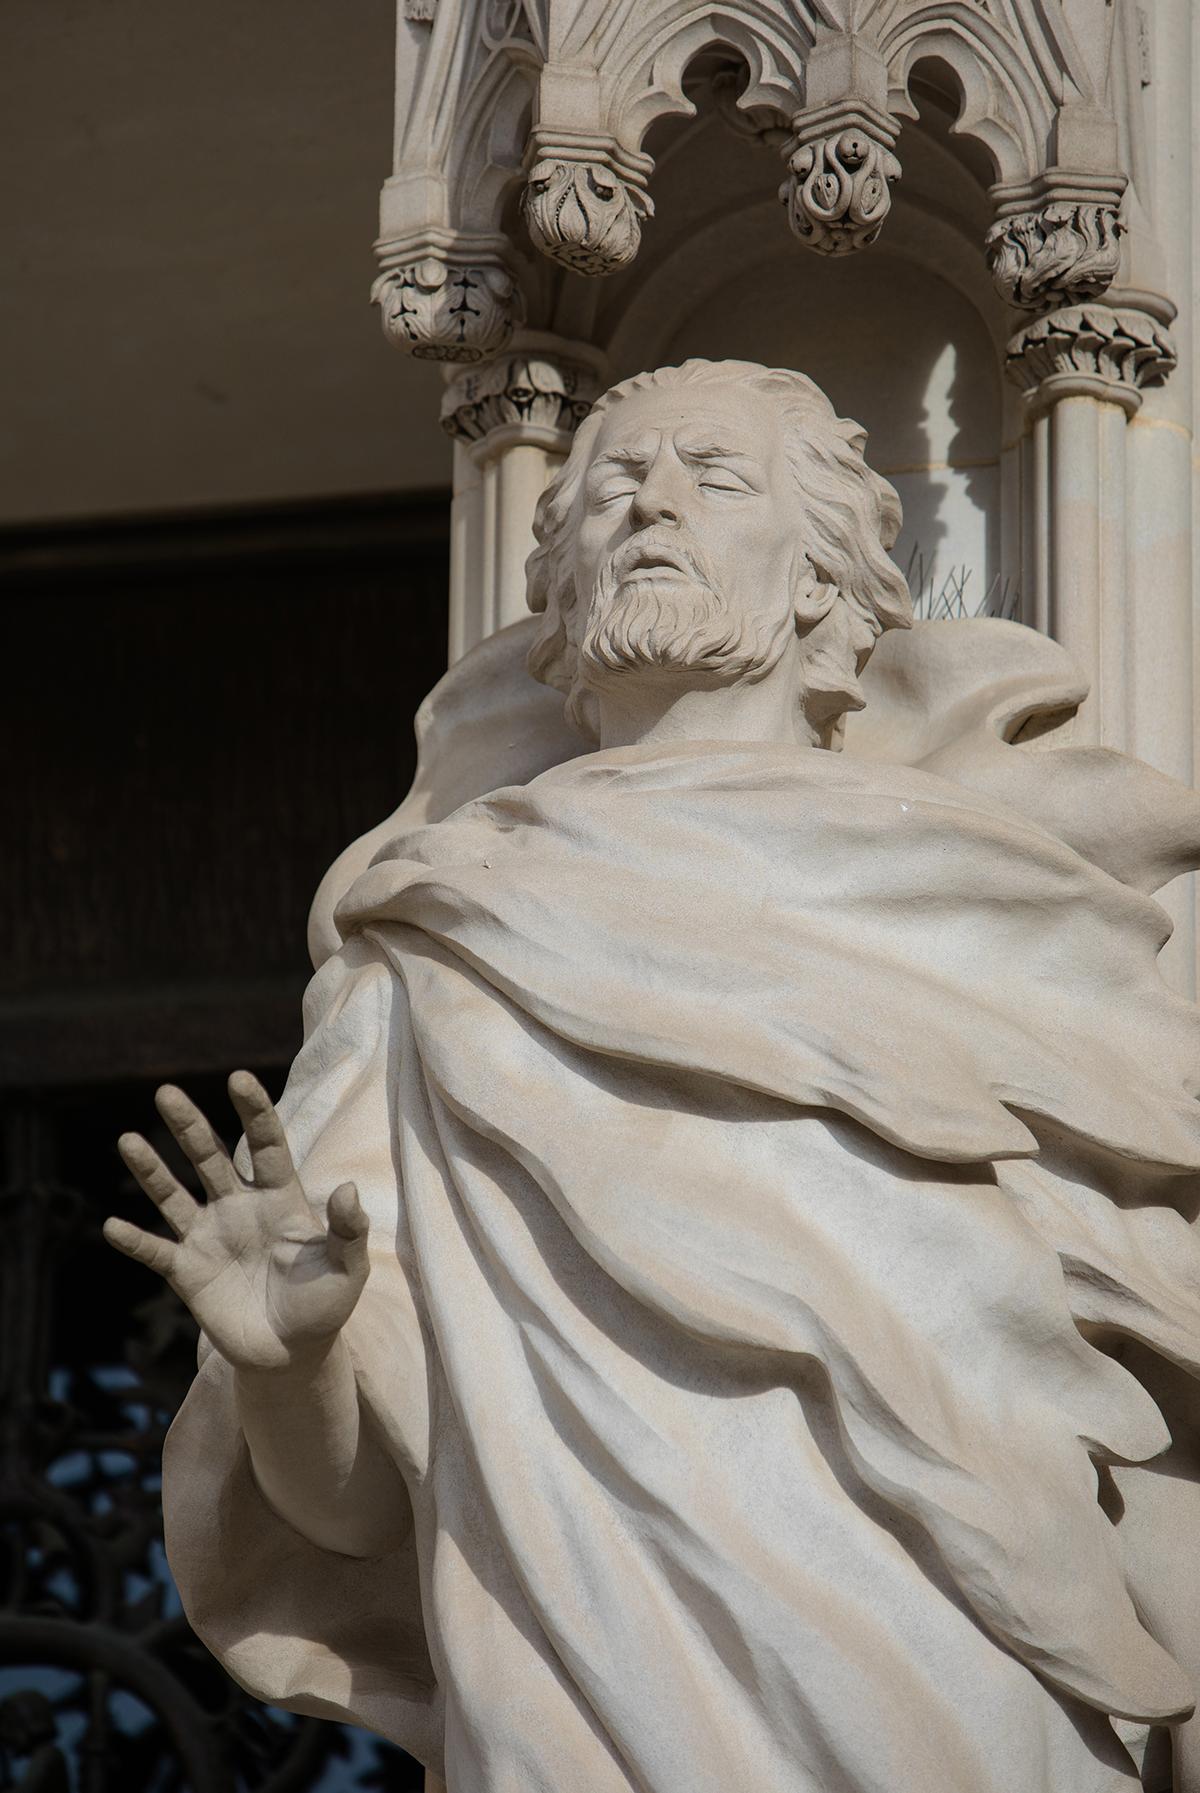 “Paul at the moment he was struck blind when Christ spoke to him; blind yet awakened spiritually,” said Hart about his sculpture of St. Paul in the main portal of the Washington National Cathedral. (christianthiel.net/Shutterstock)